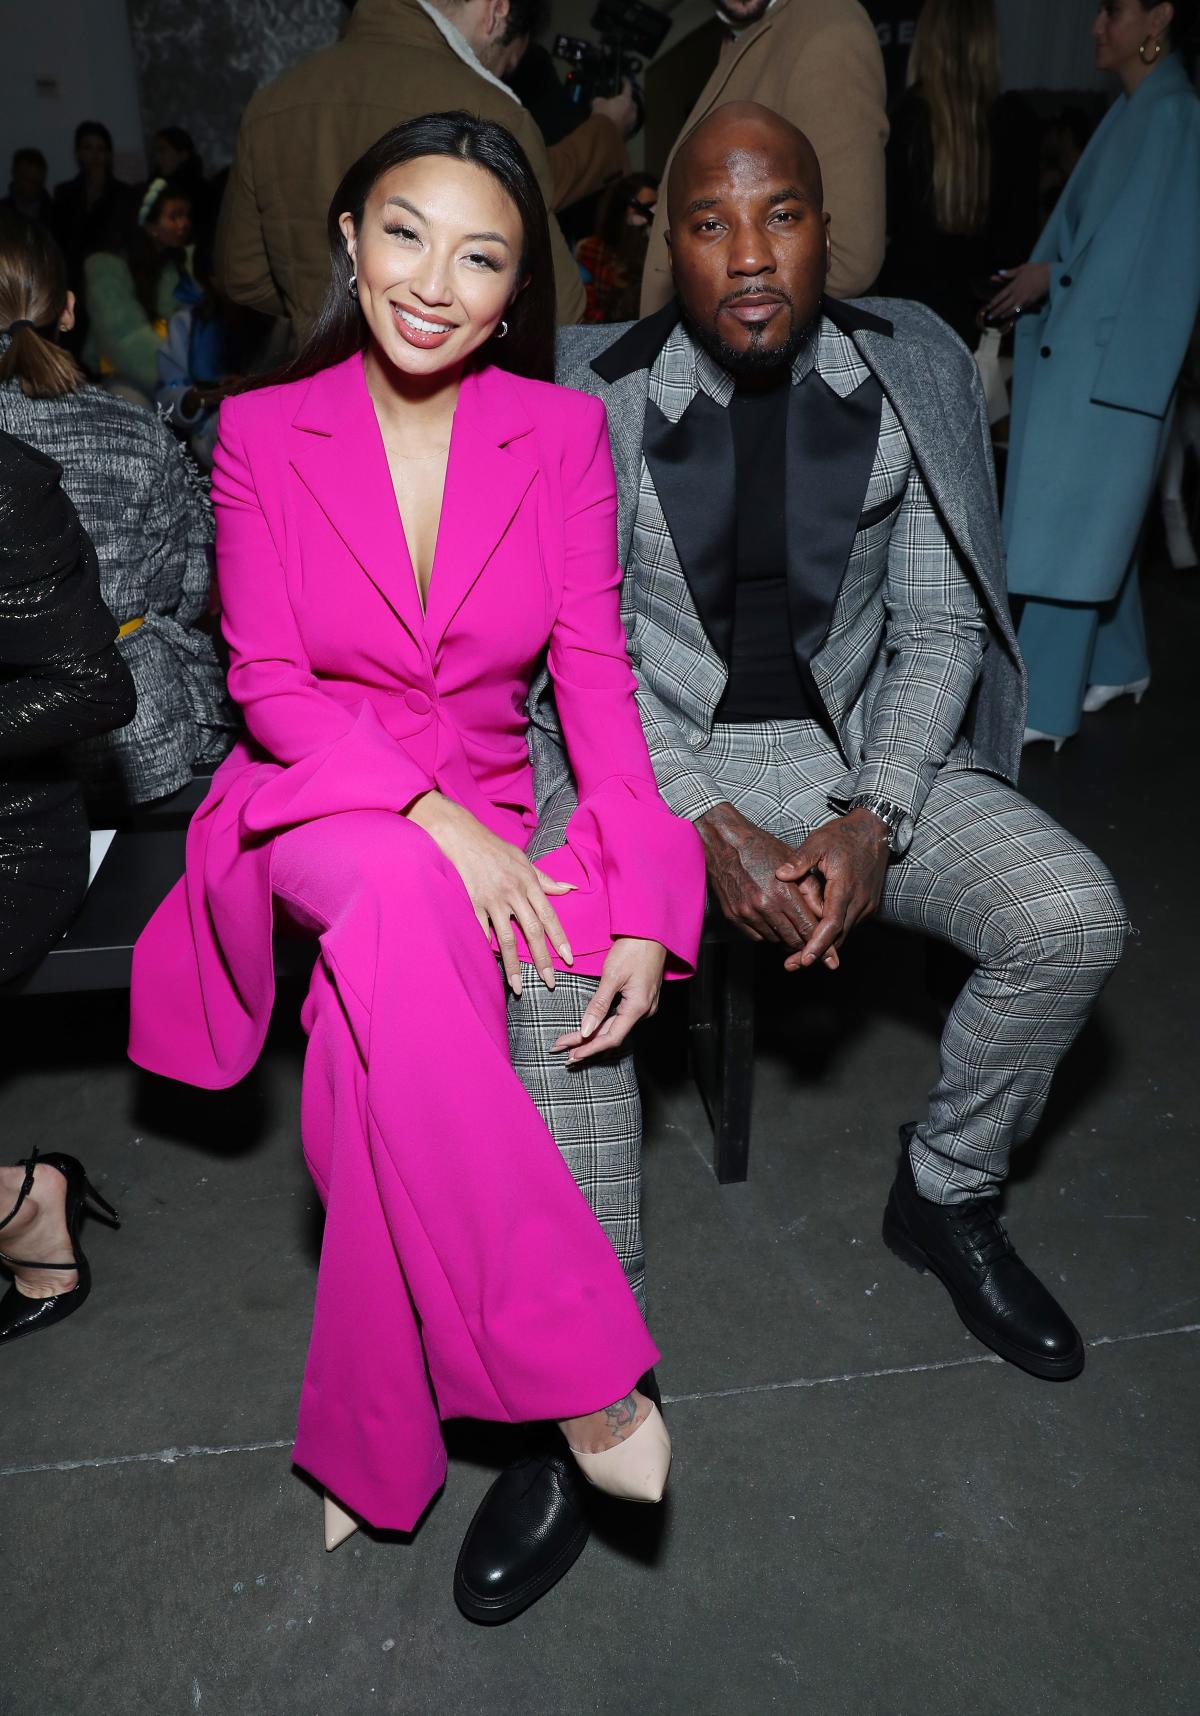 Jeezy files for divorce from Jeannie Mai after 2 years: 'No hope for ...